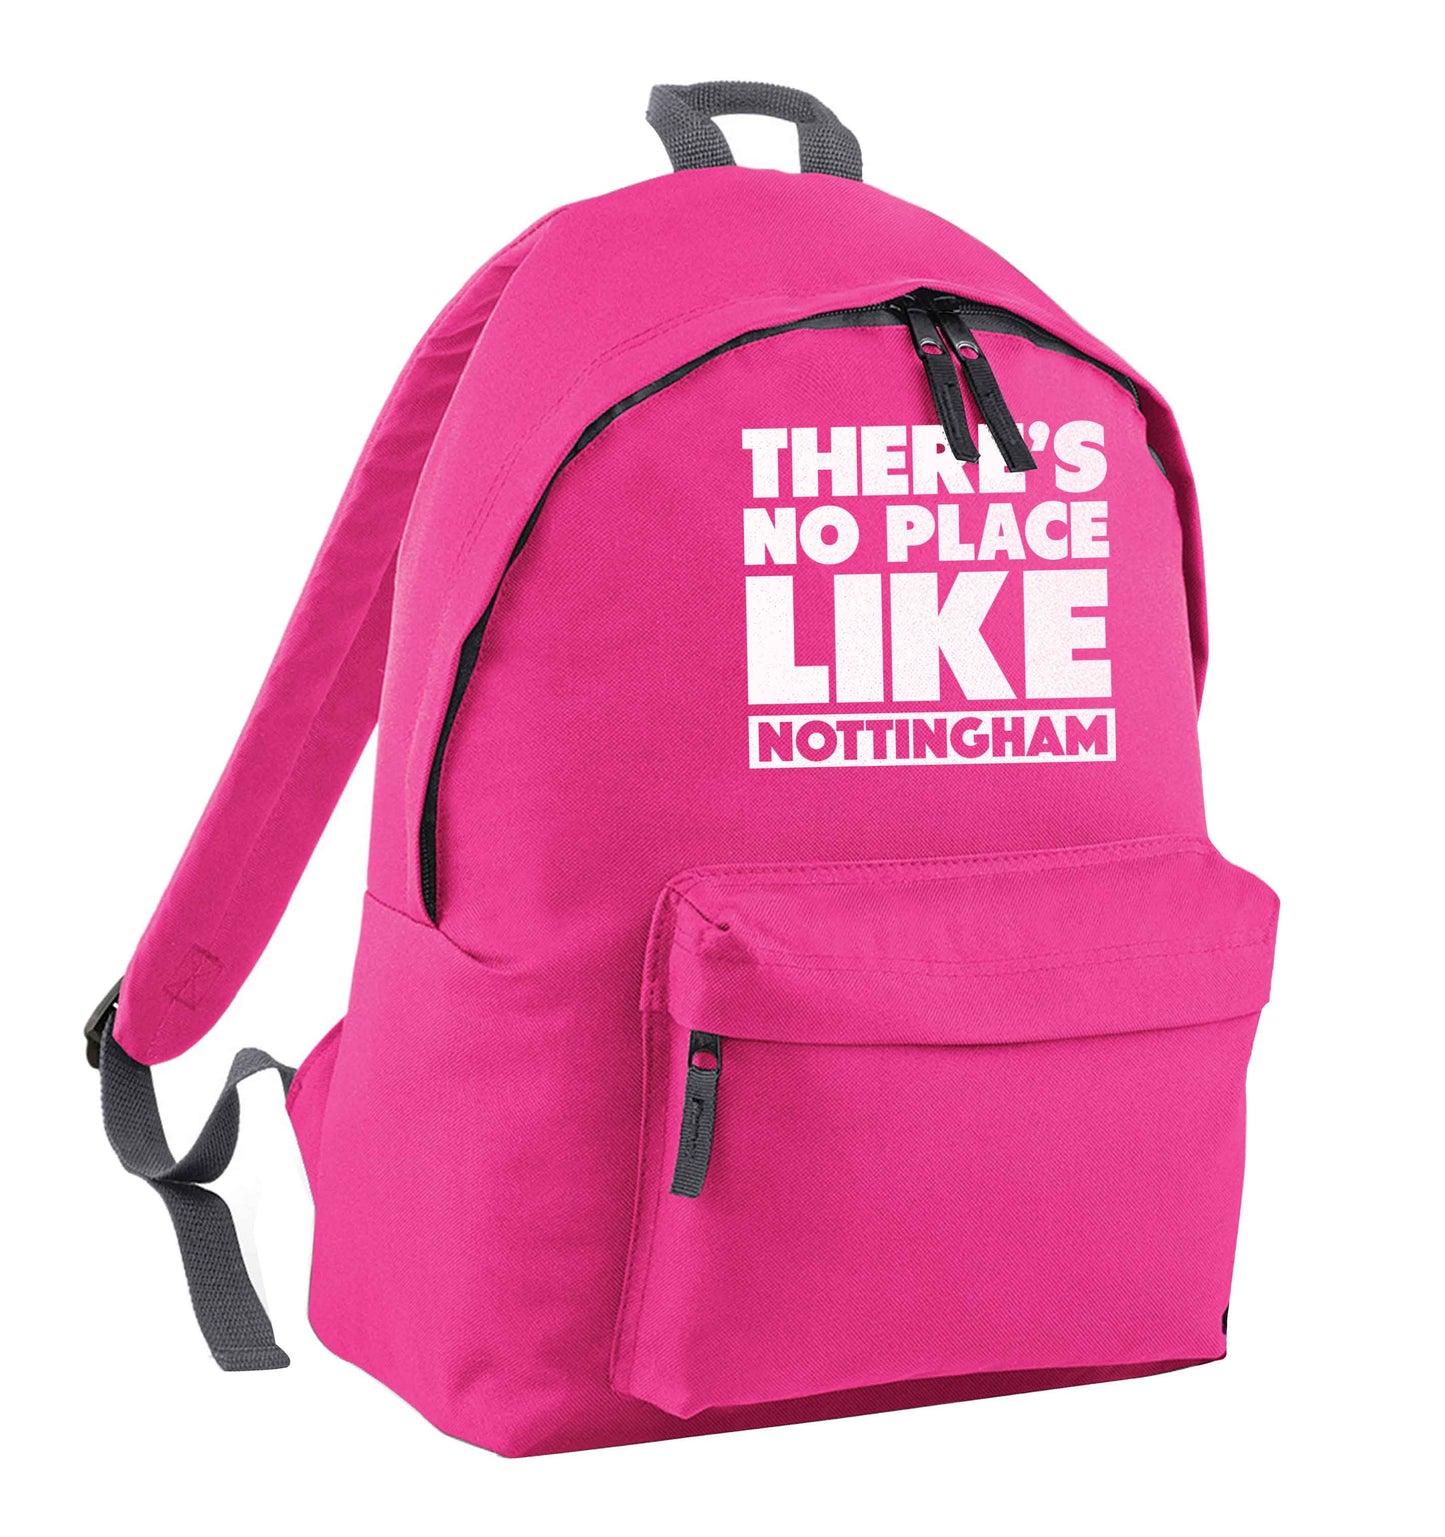 There's no place like Nottingham pink children's backpack